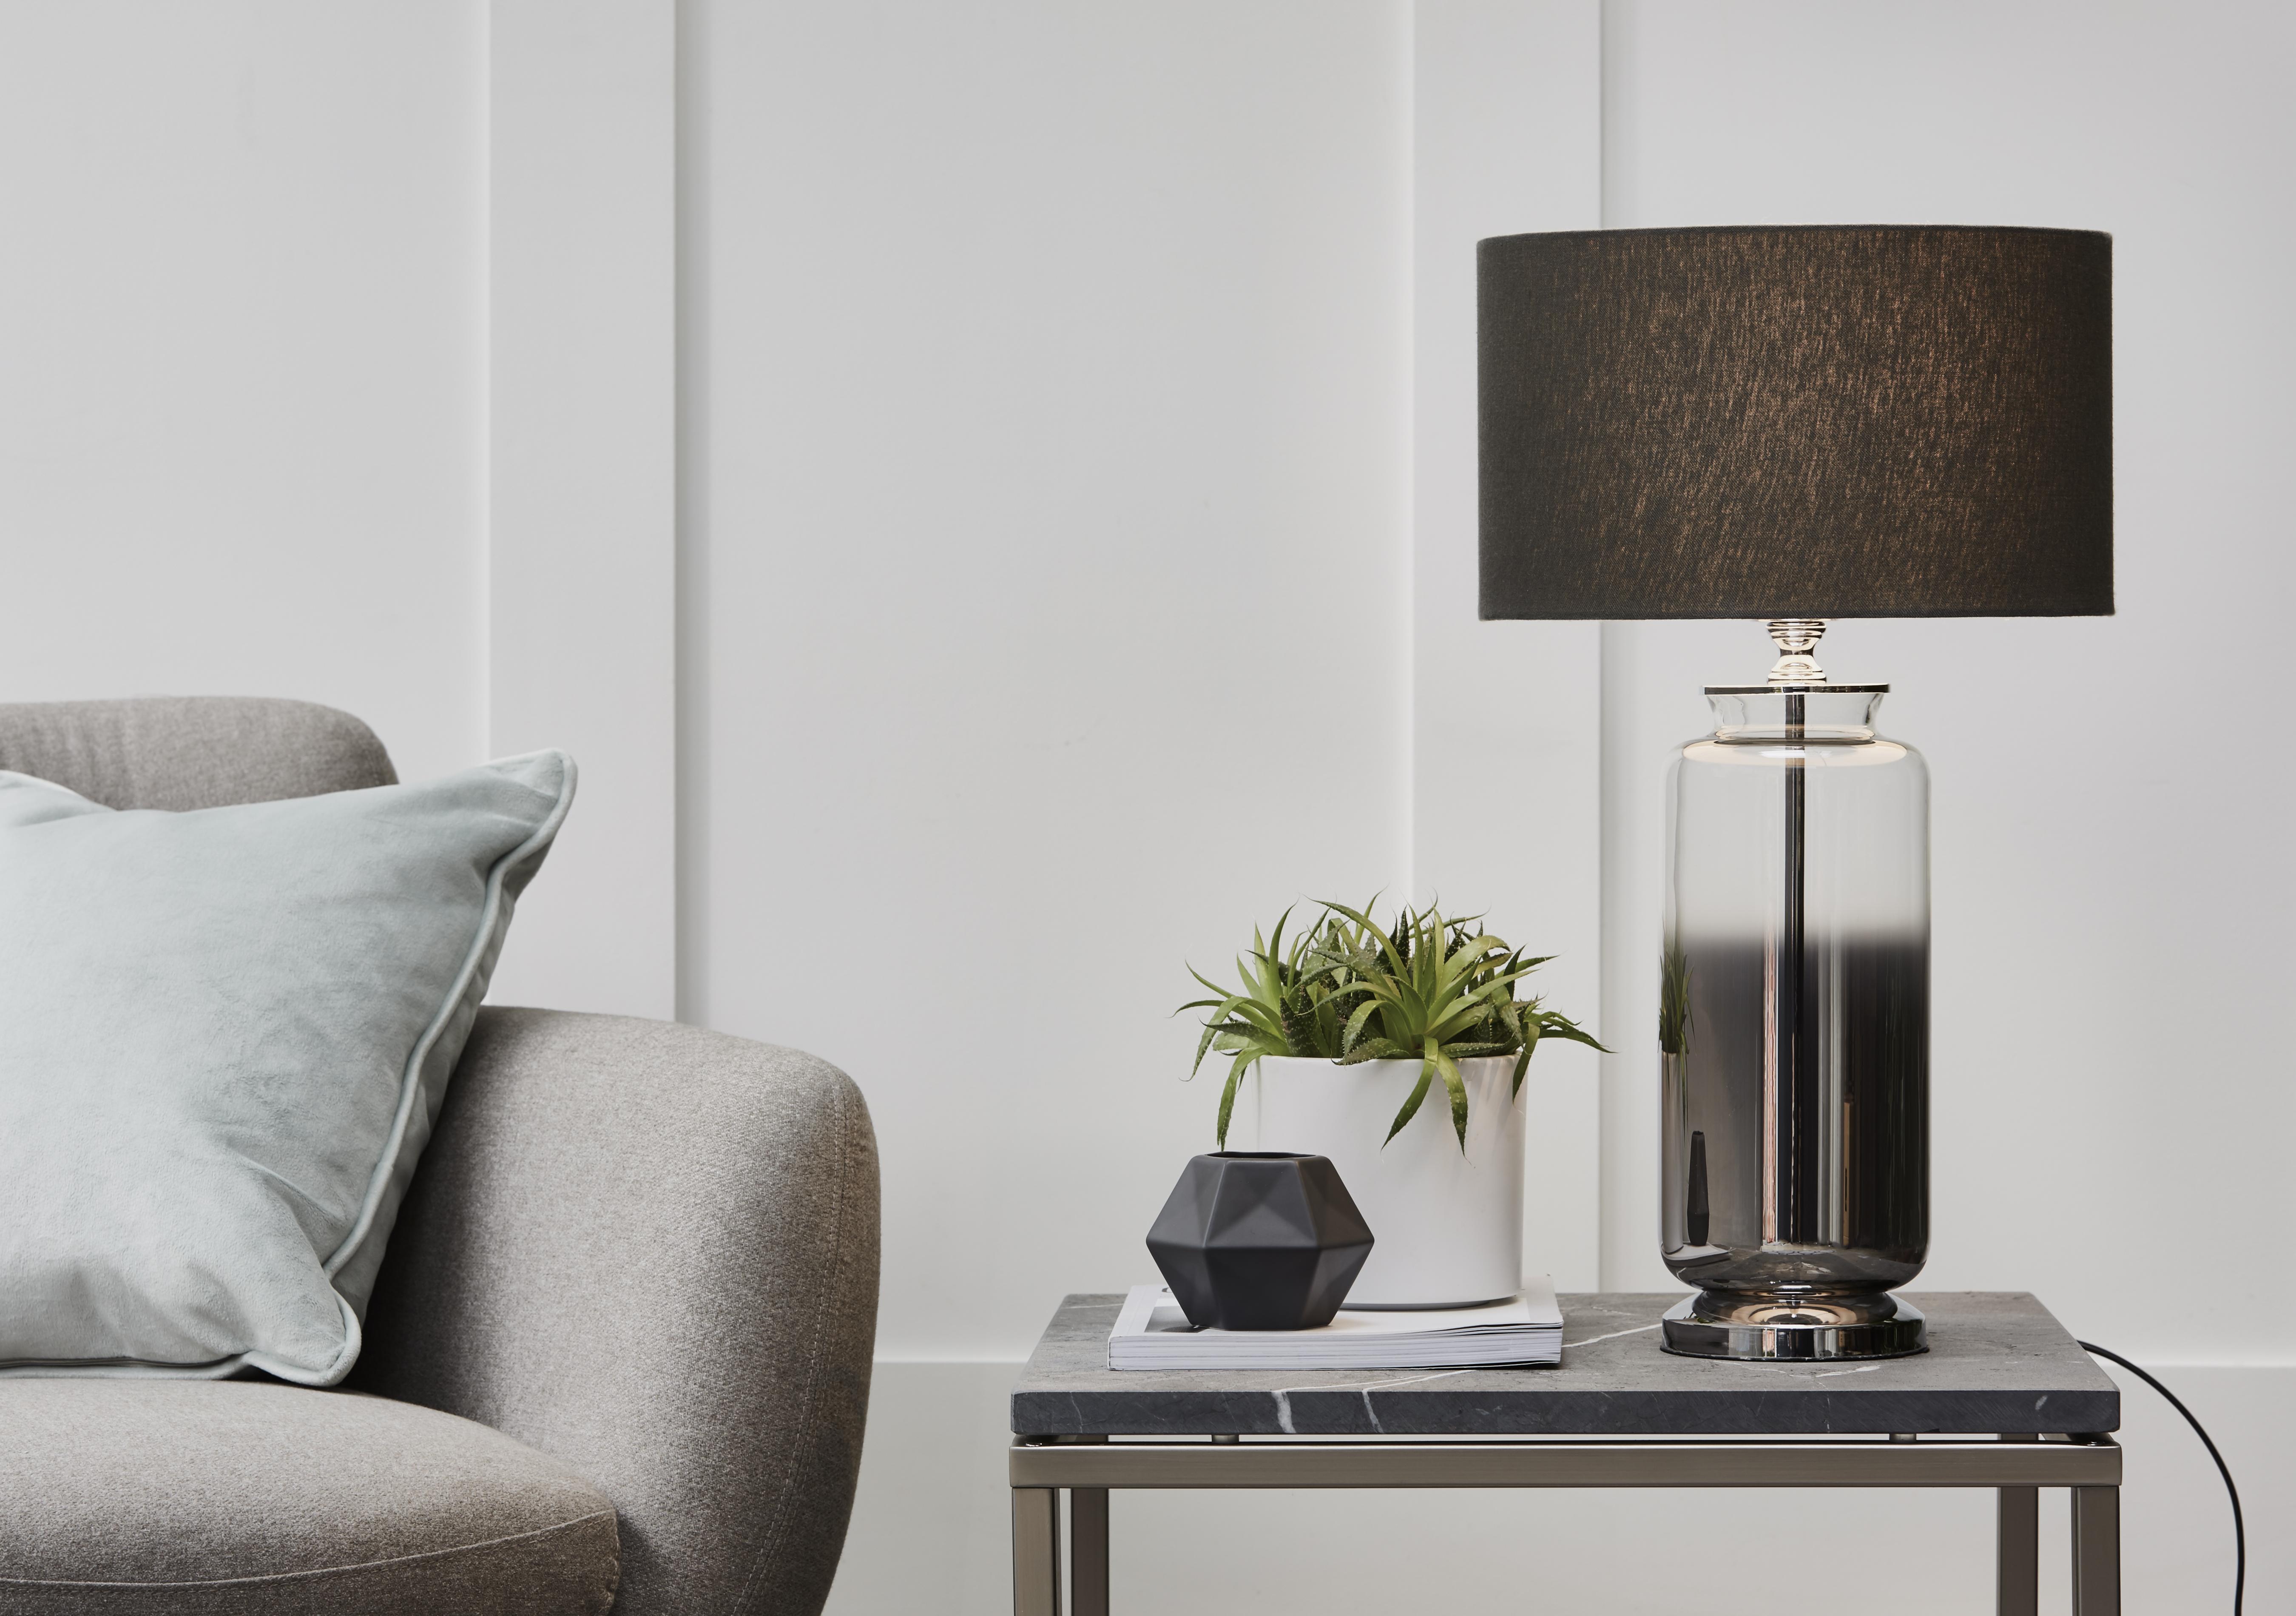 Grey Ombre Glass Table Lamp in  on Furniture Village